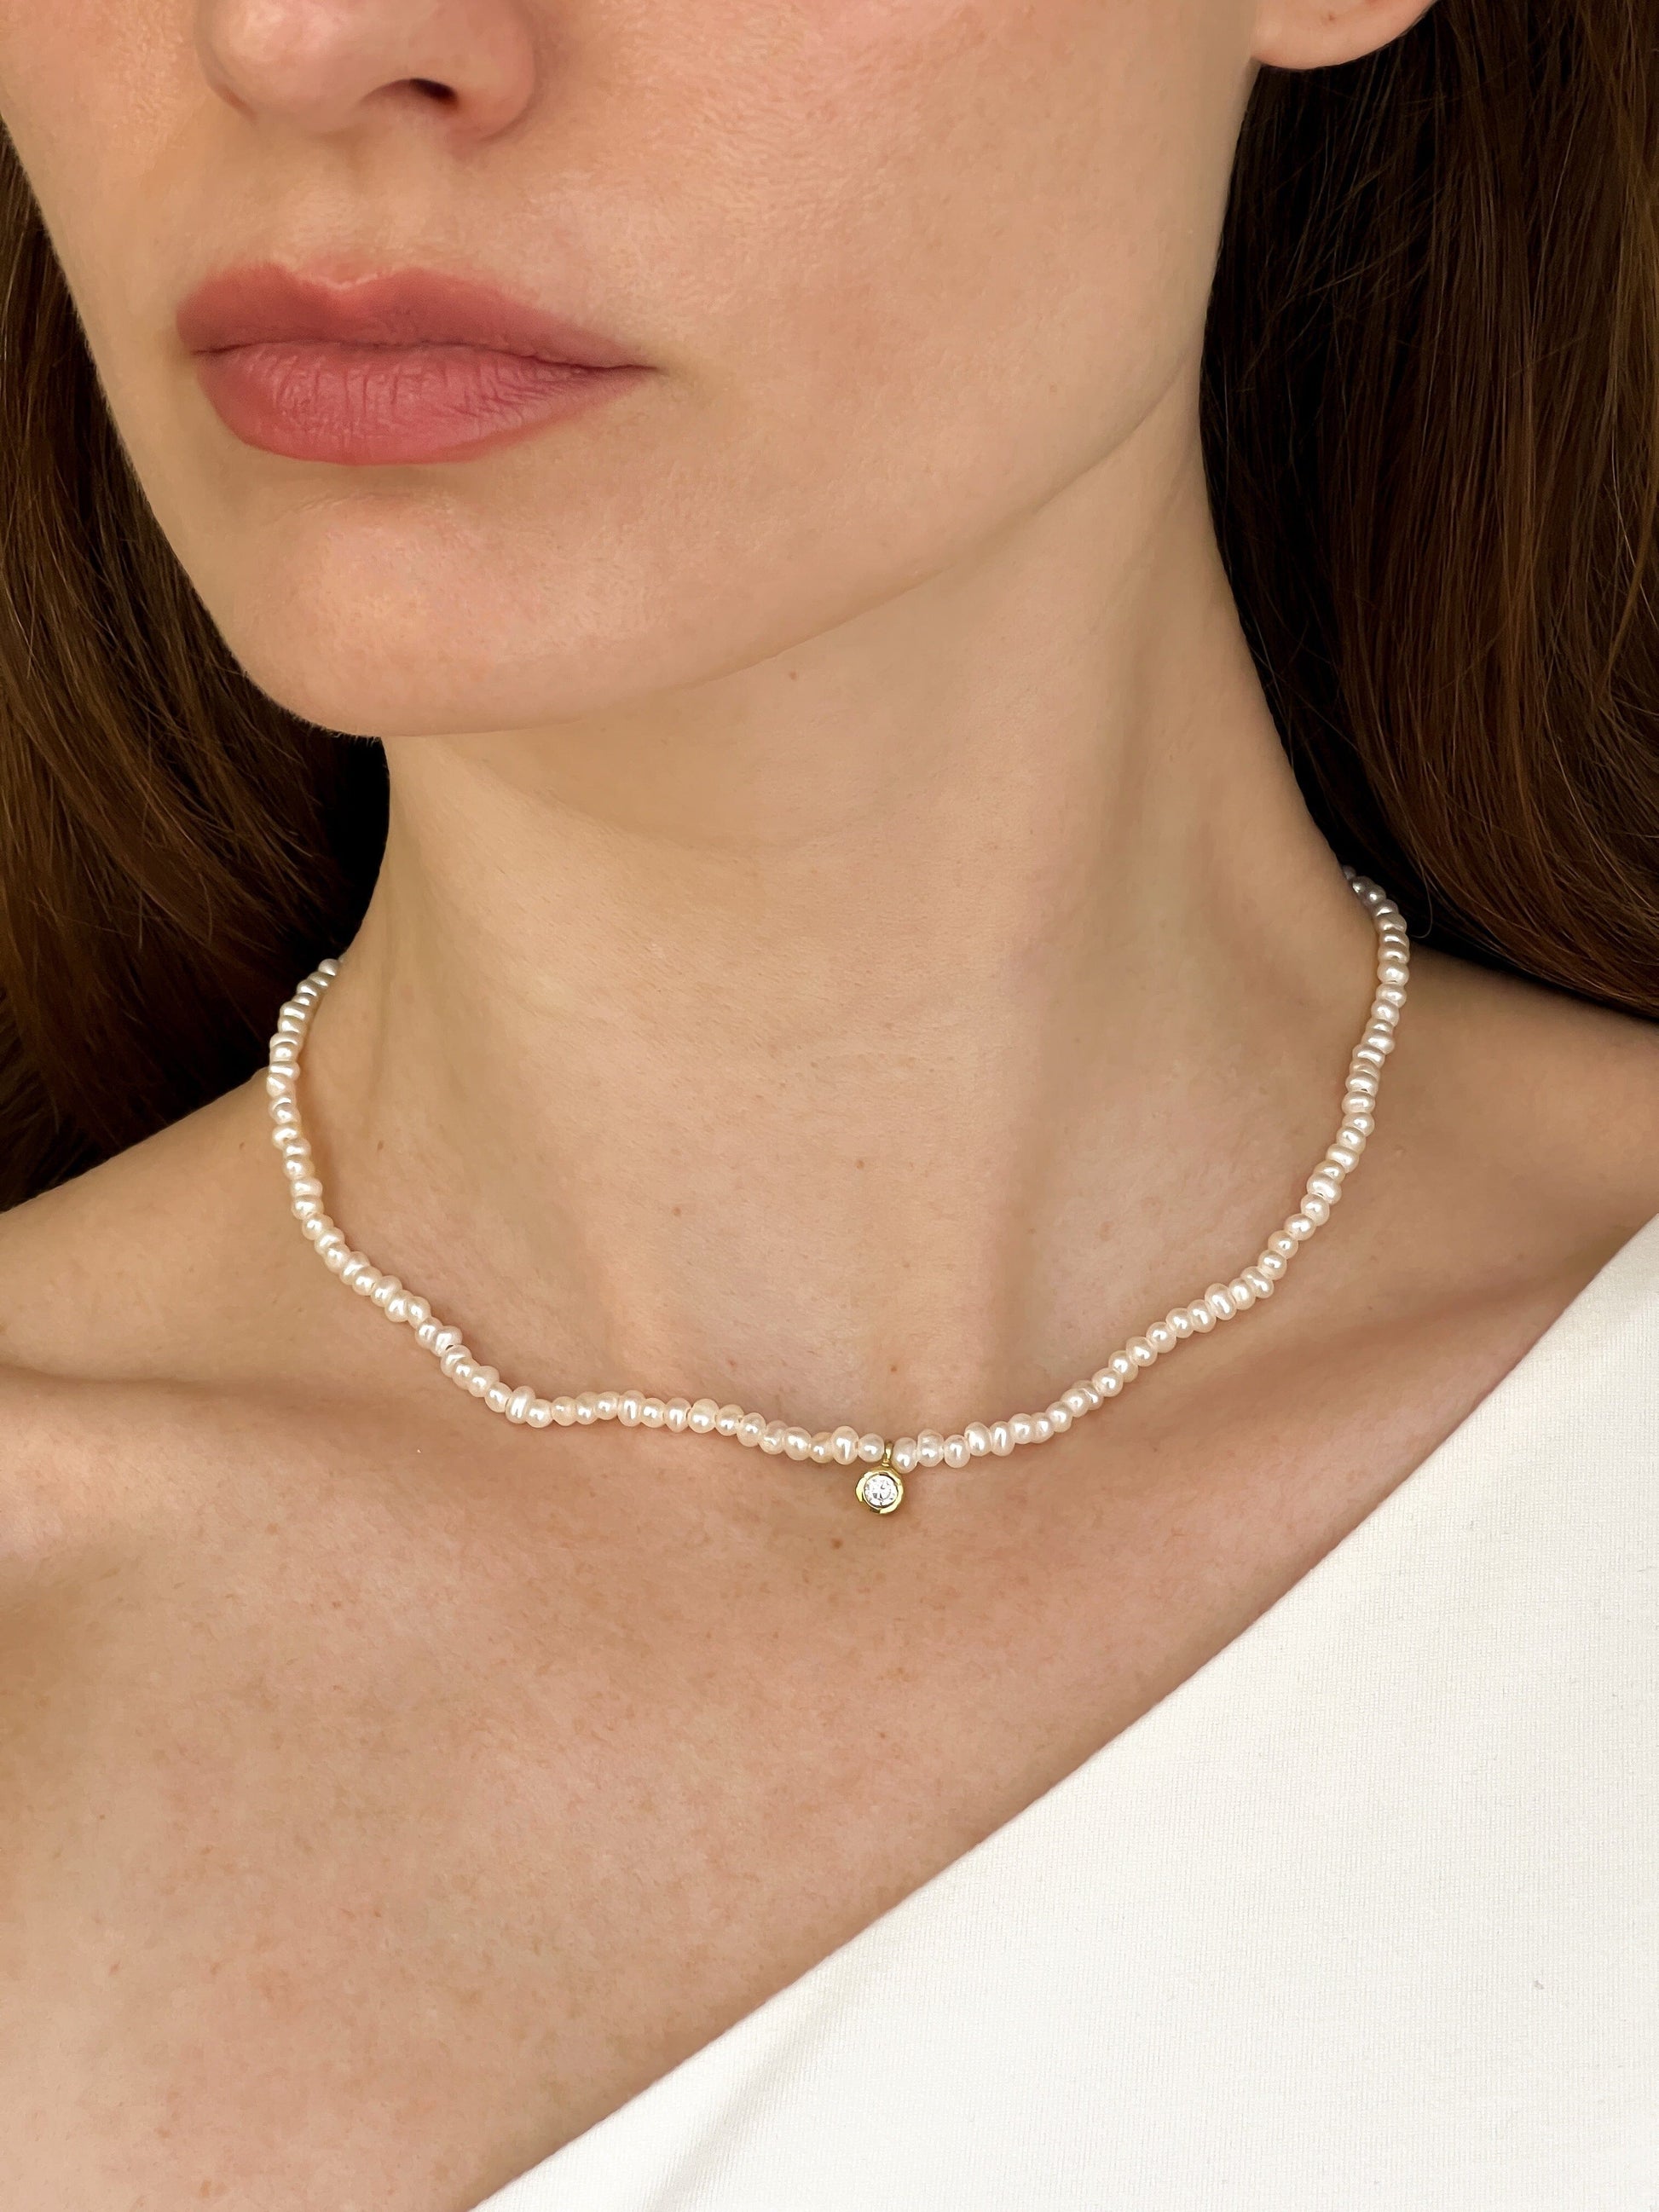 Collier Perles & Diamant - Or Blanc 14 carats Necklaces magal-dev 